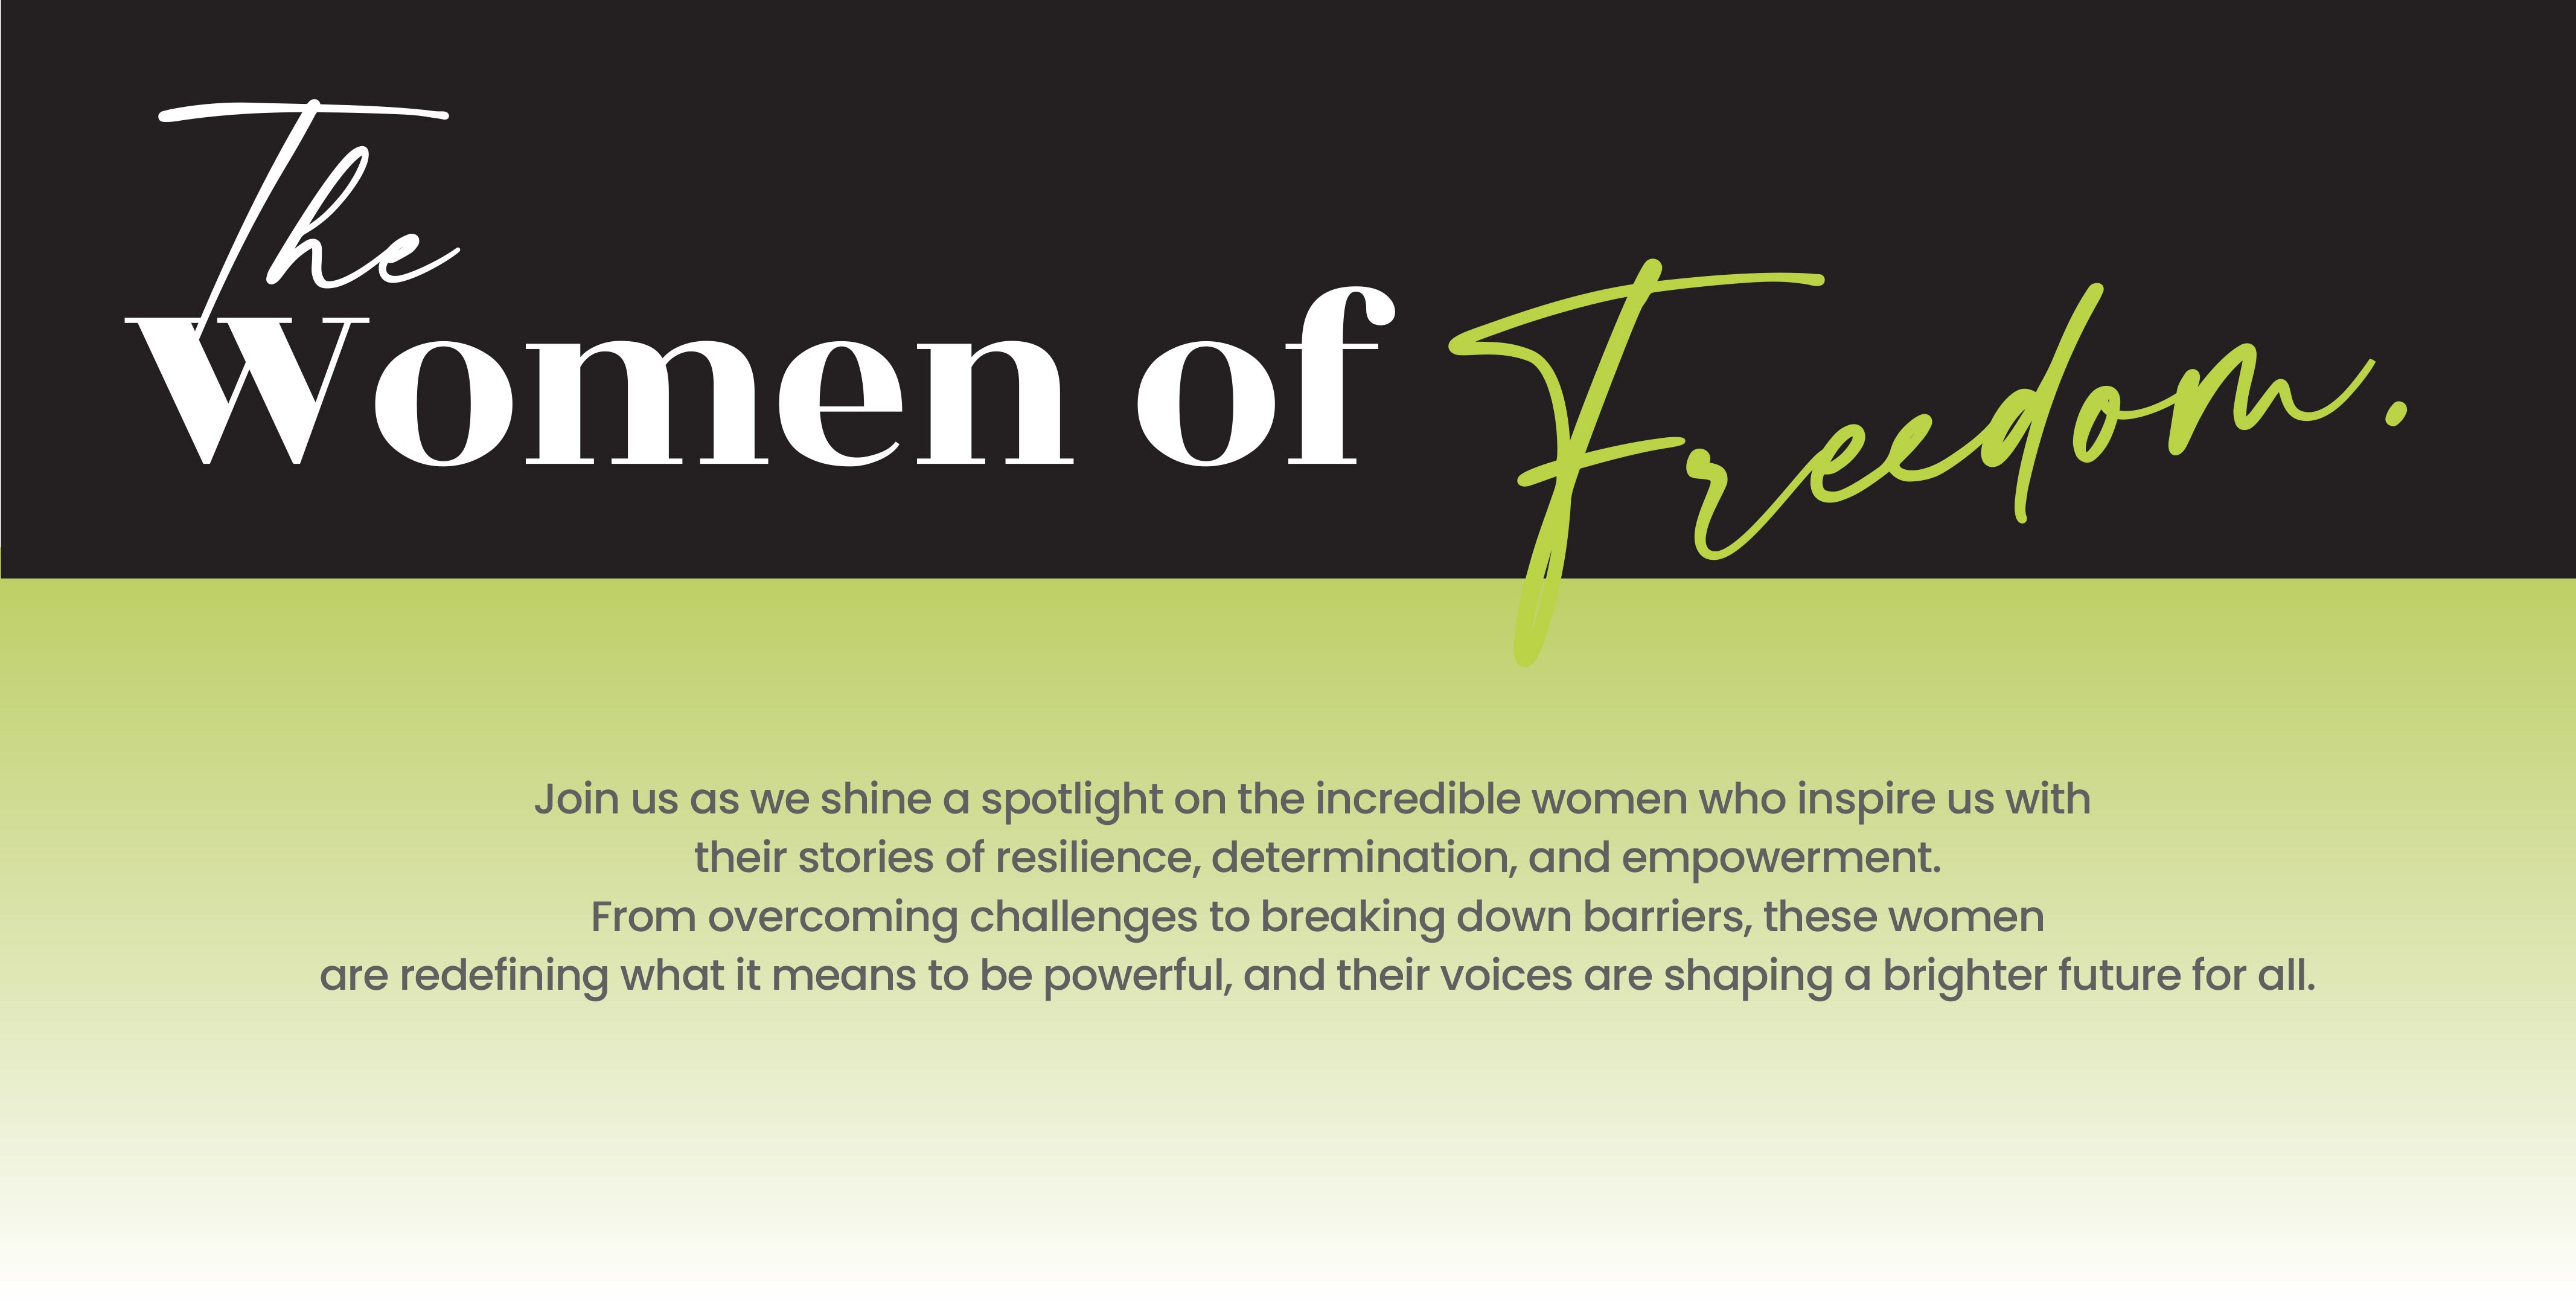 The Women of Freedom